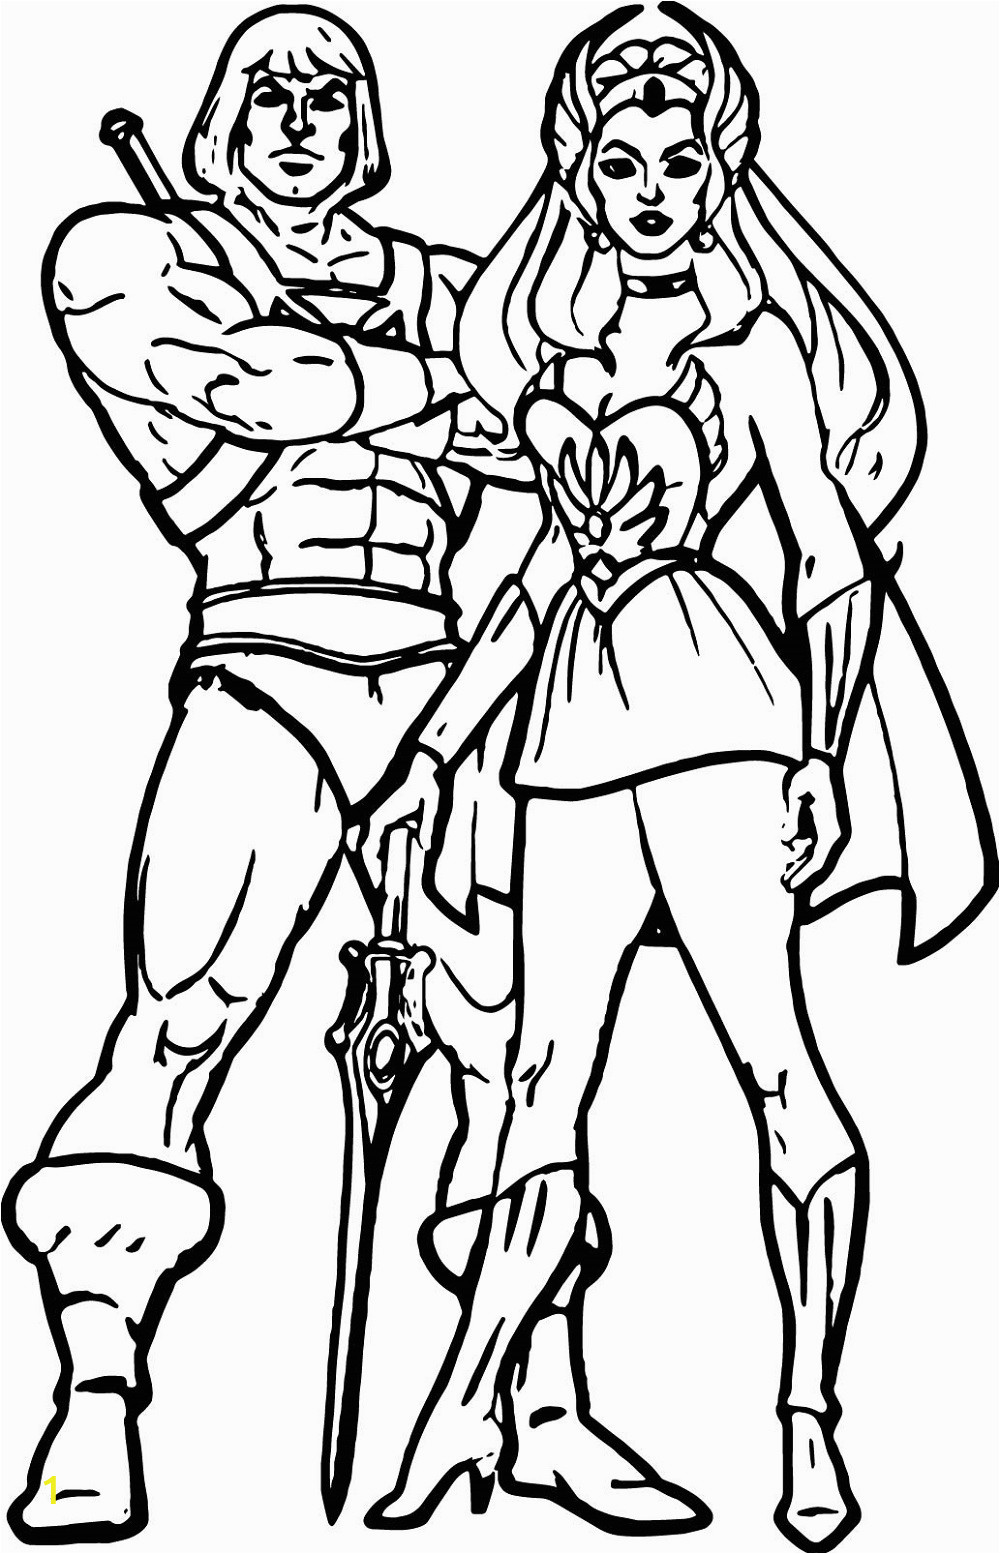 he man coloring pages able